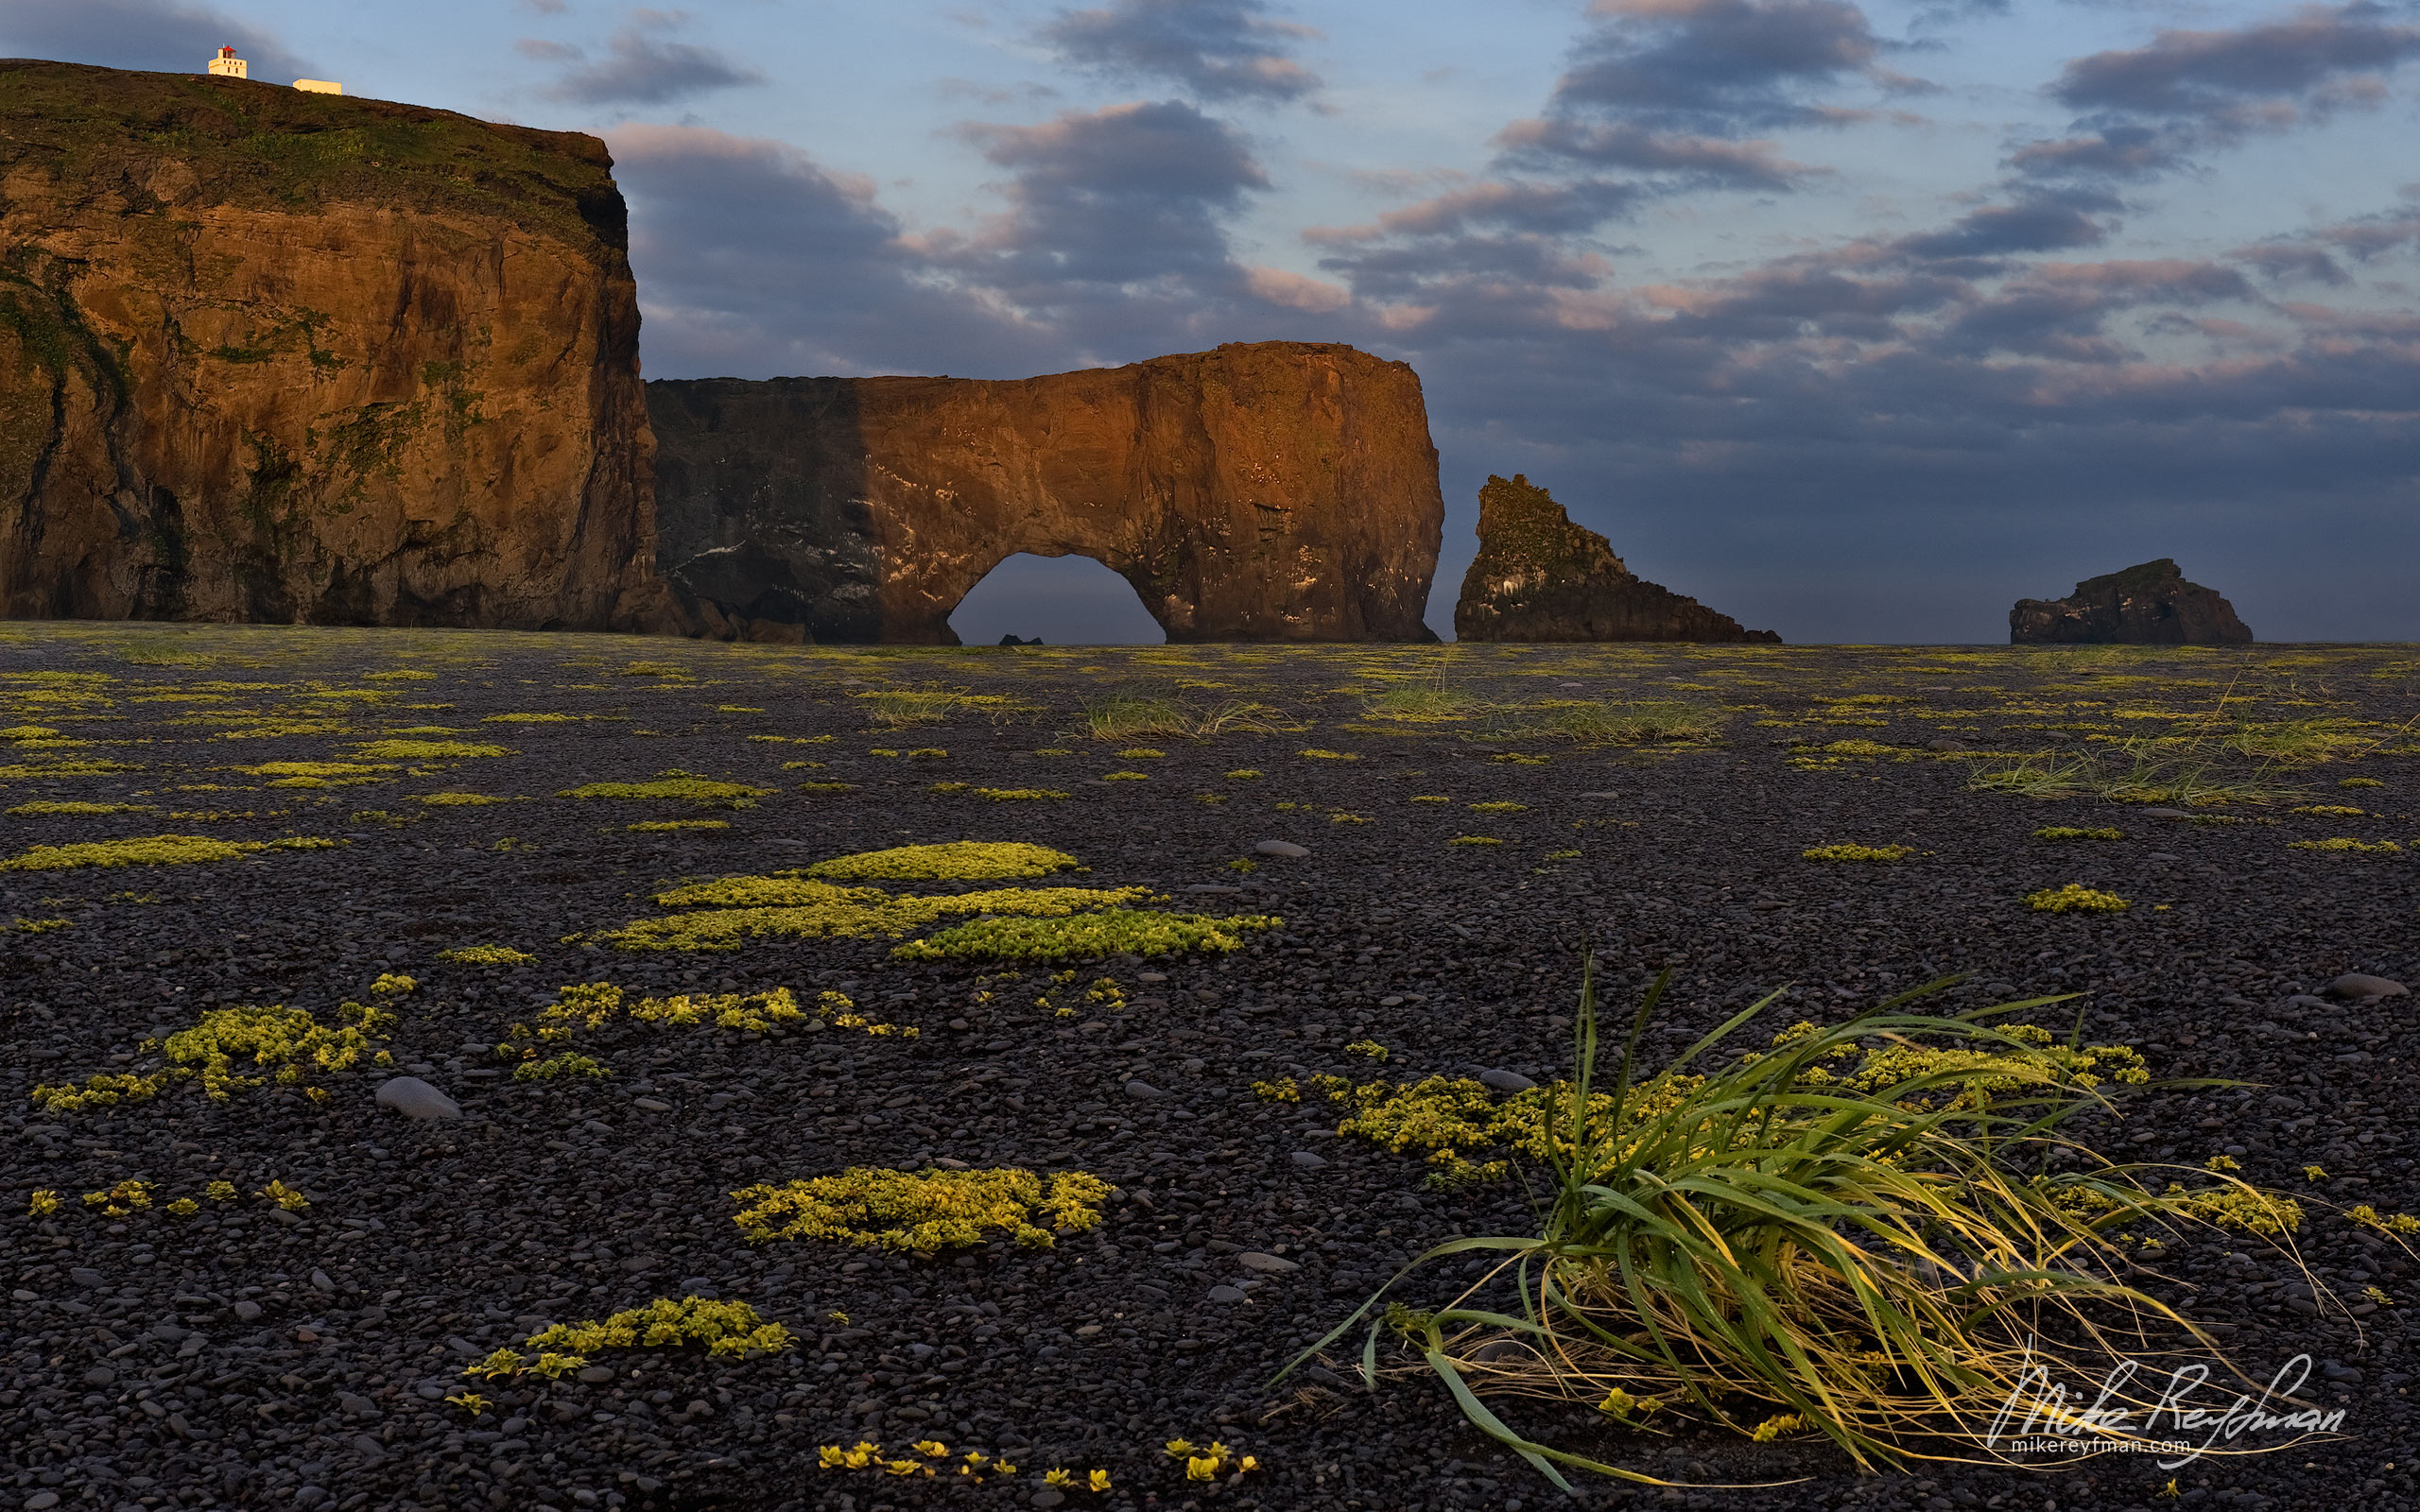 Dyrholaey black volcanic sand beach with Cape Dyrholaey (Door Hill) in the background. Southern Iceland. 030-IC-CL_MR27680-5 - Where Lava Meets the Ocean. Iceland coastline. - Mike Reyfman Photography